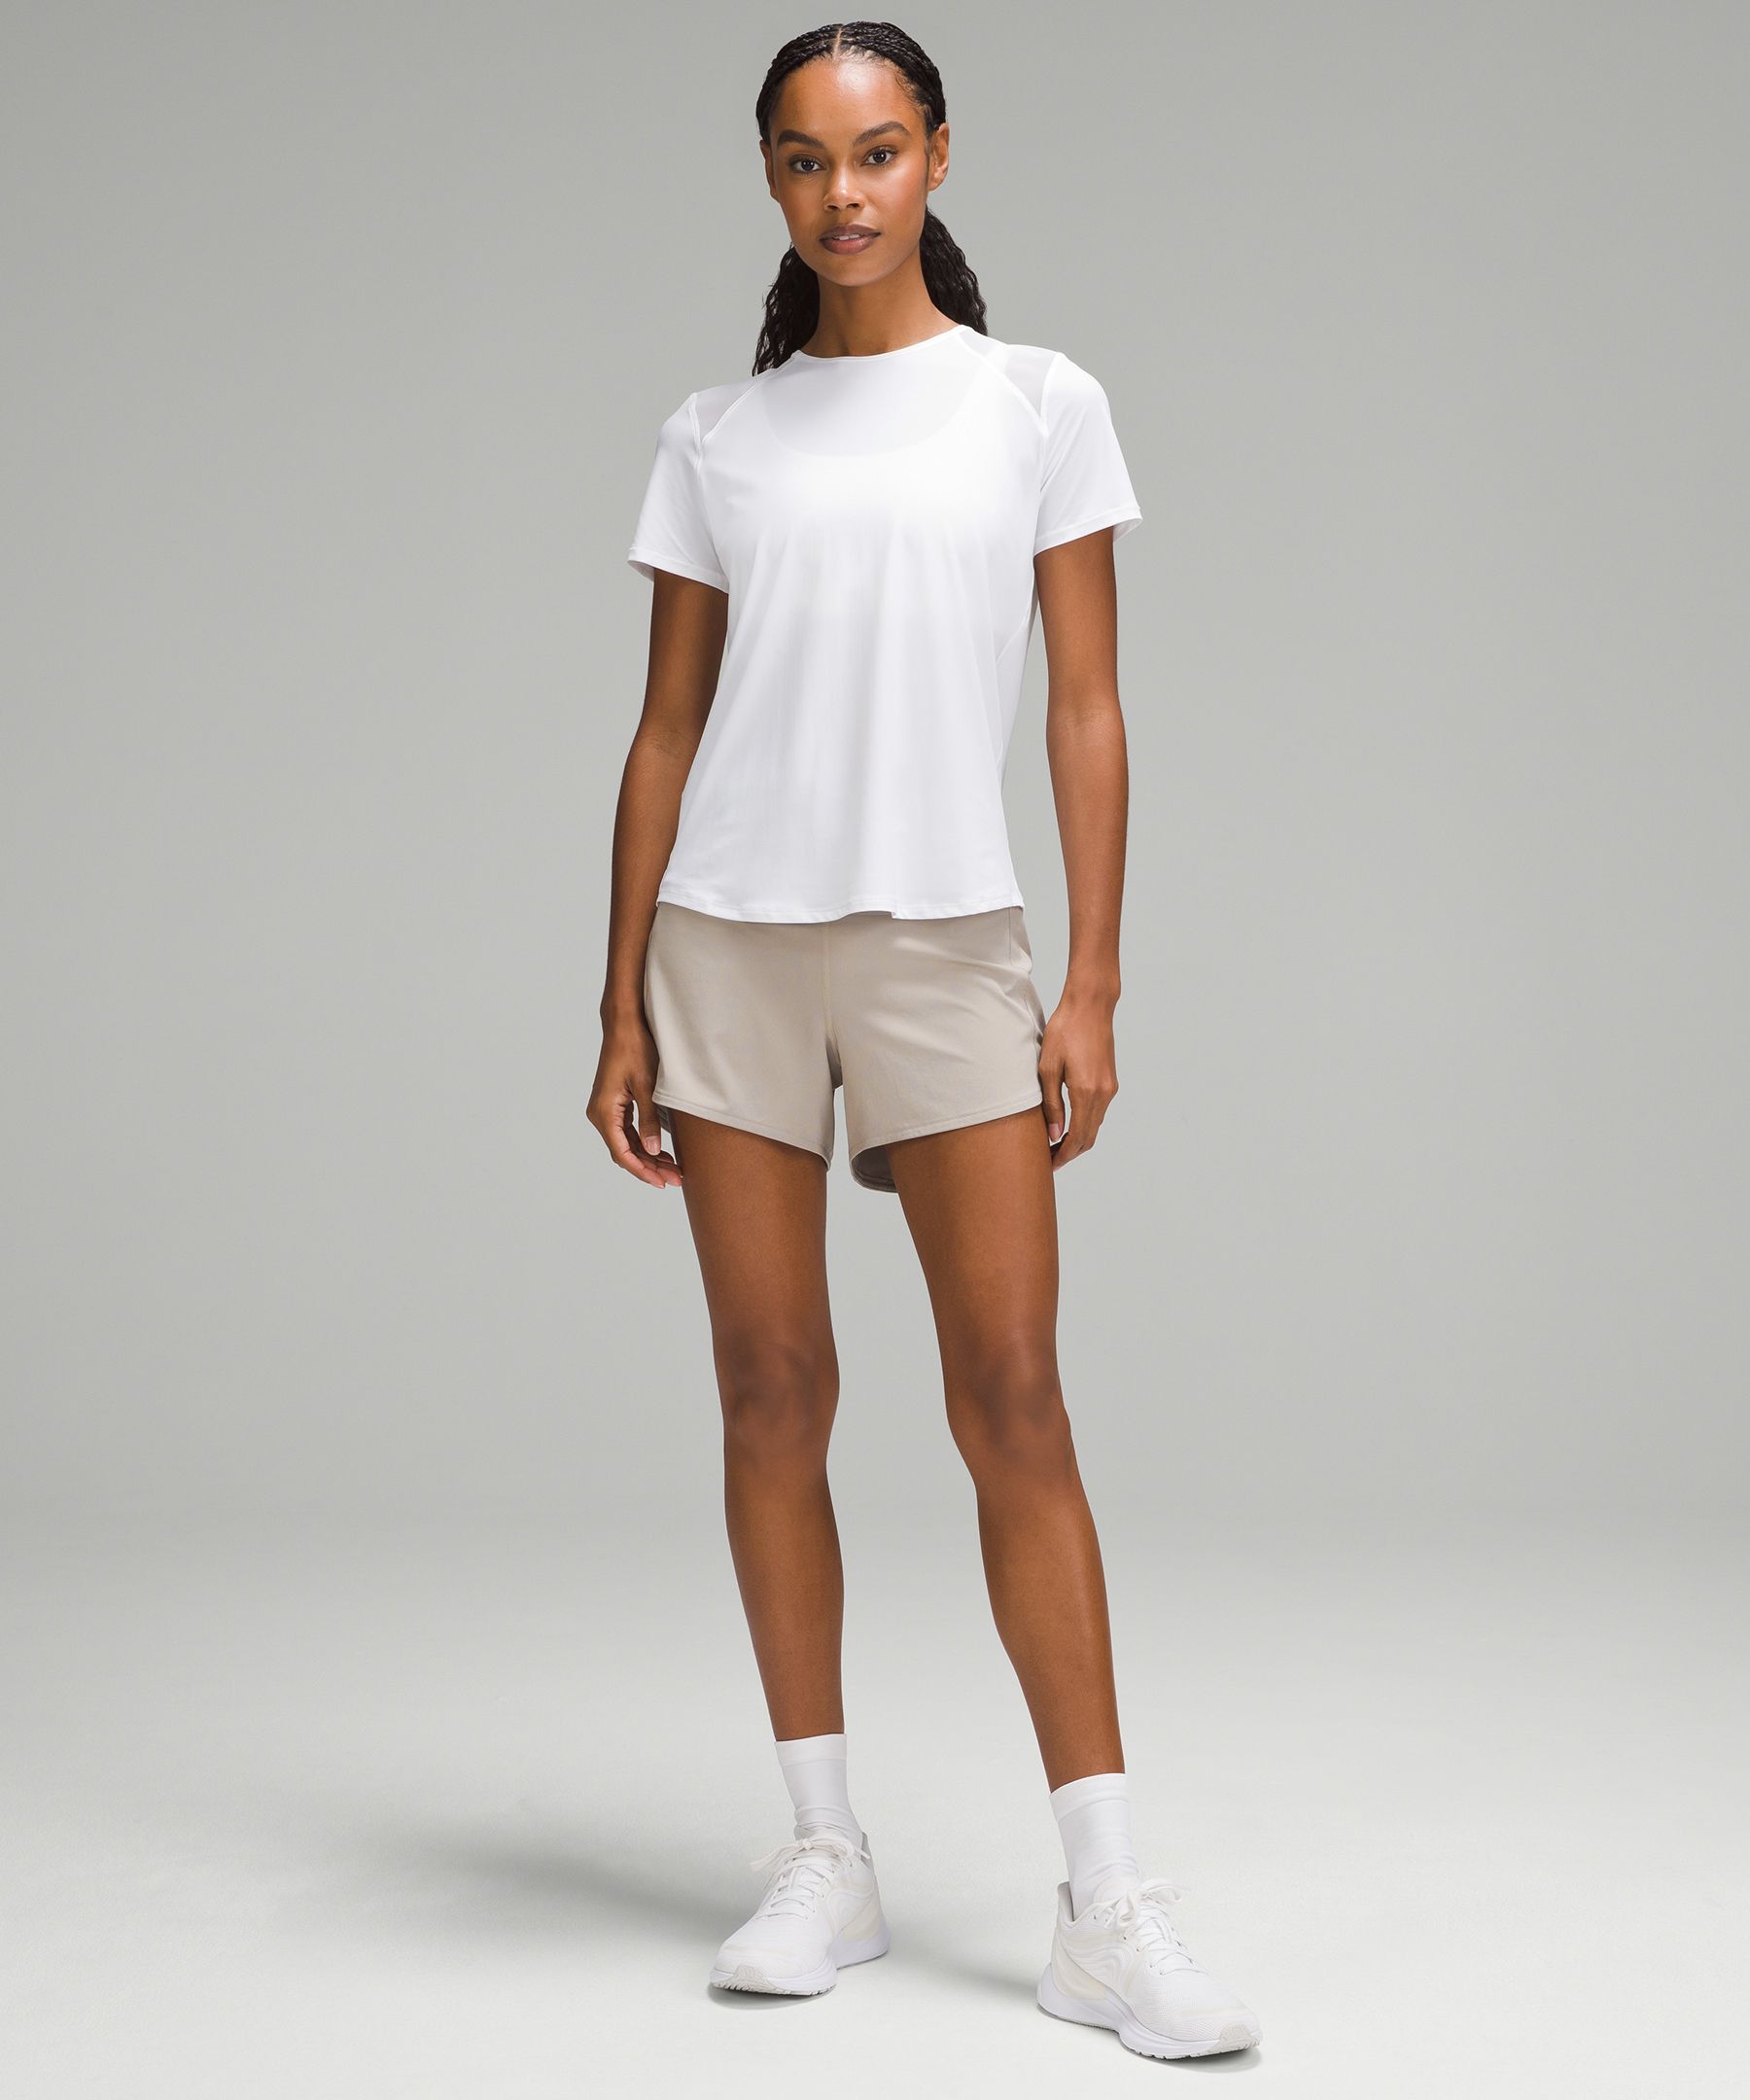 Speed Up High-Rise Lined Short 2.5, Shorts